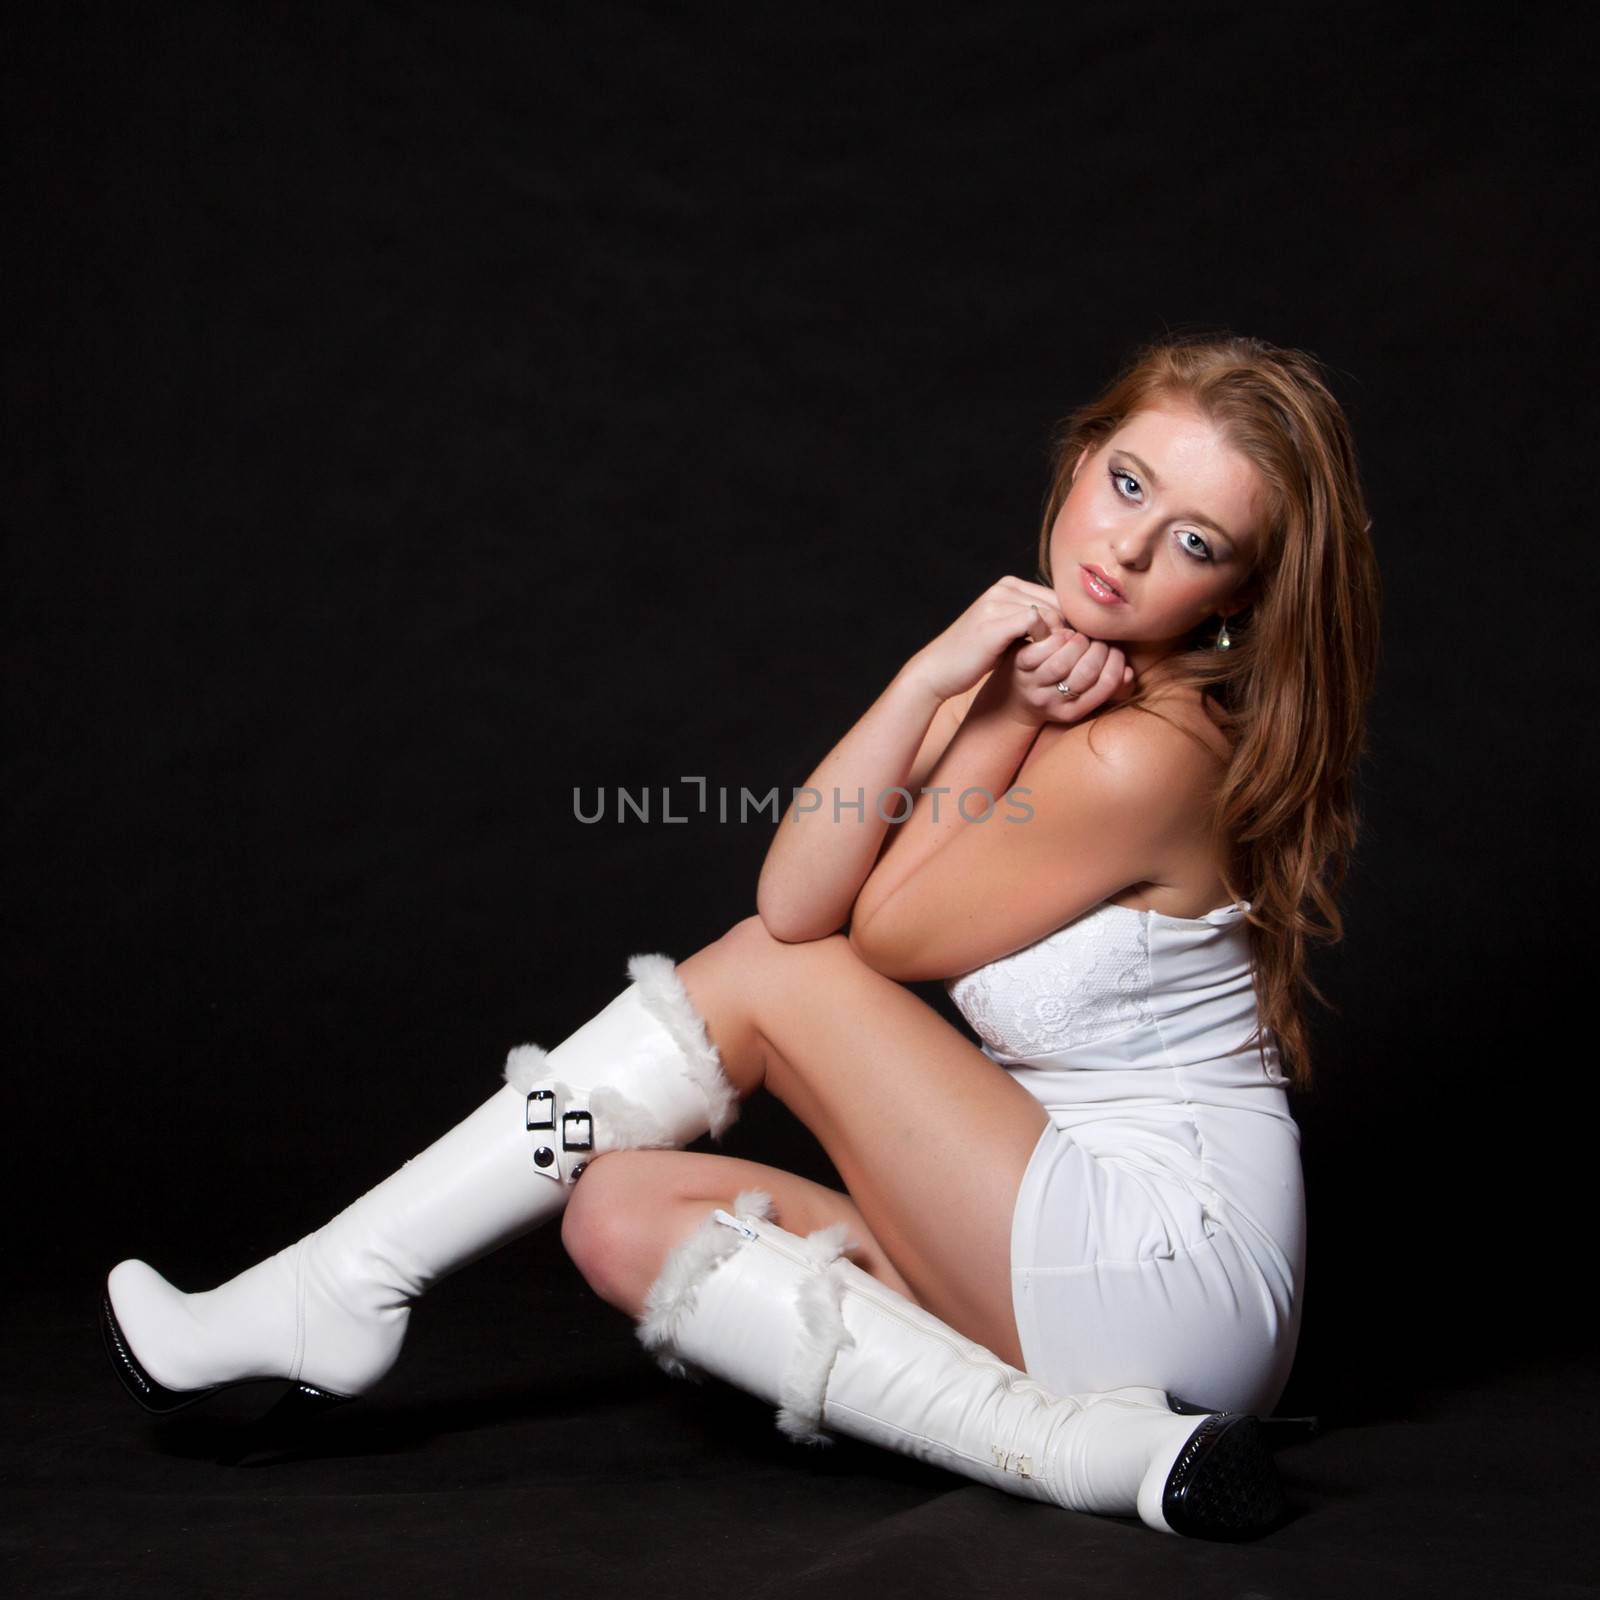 Young fashion model in a white mini dress sitting on the floor and looking up with a dreamy look on a black background